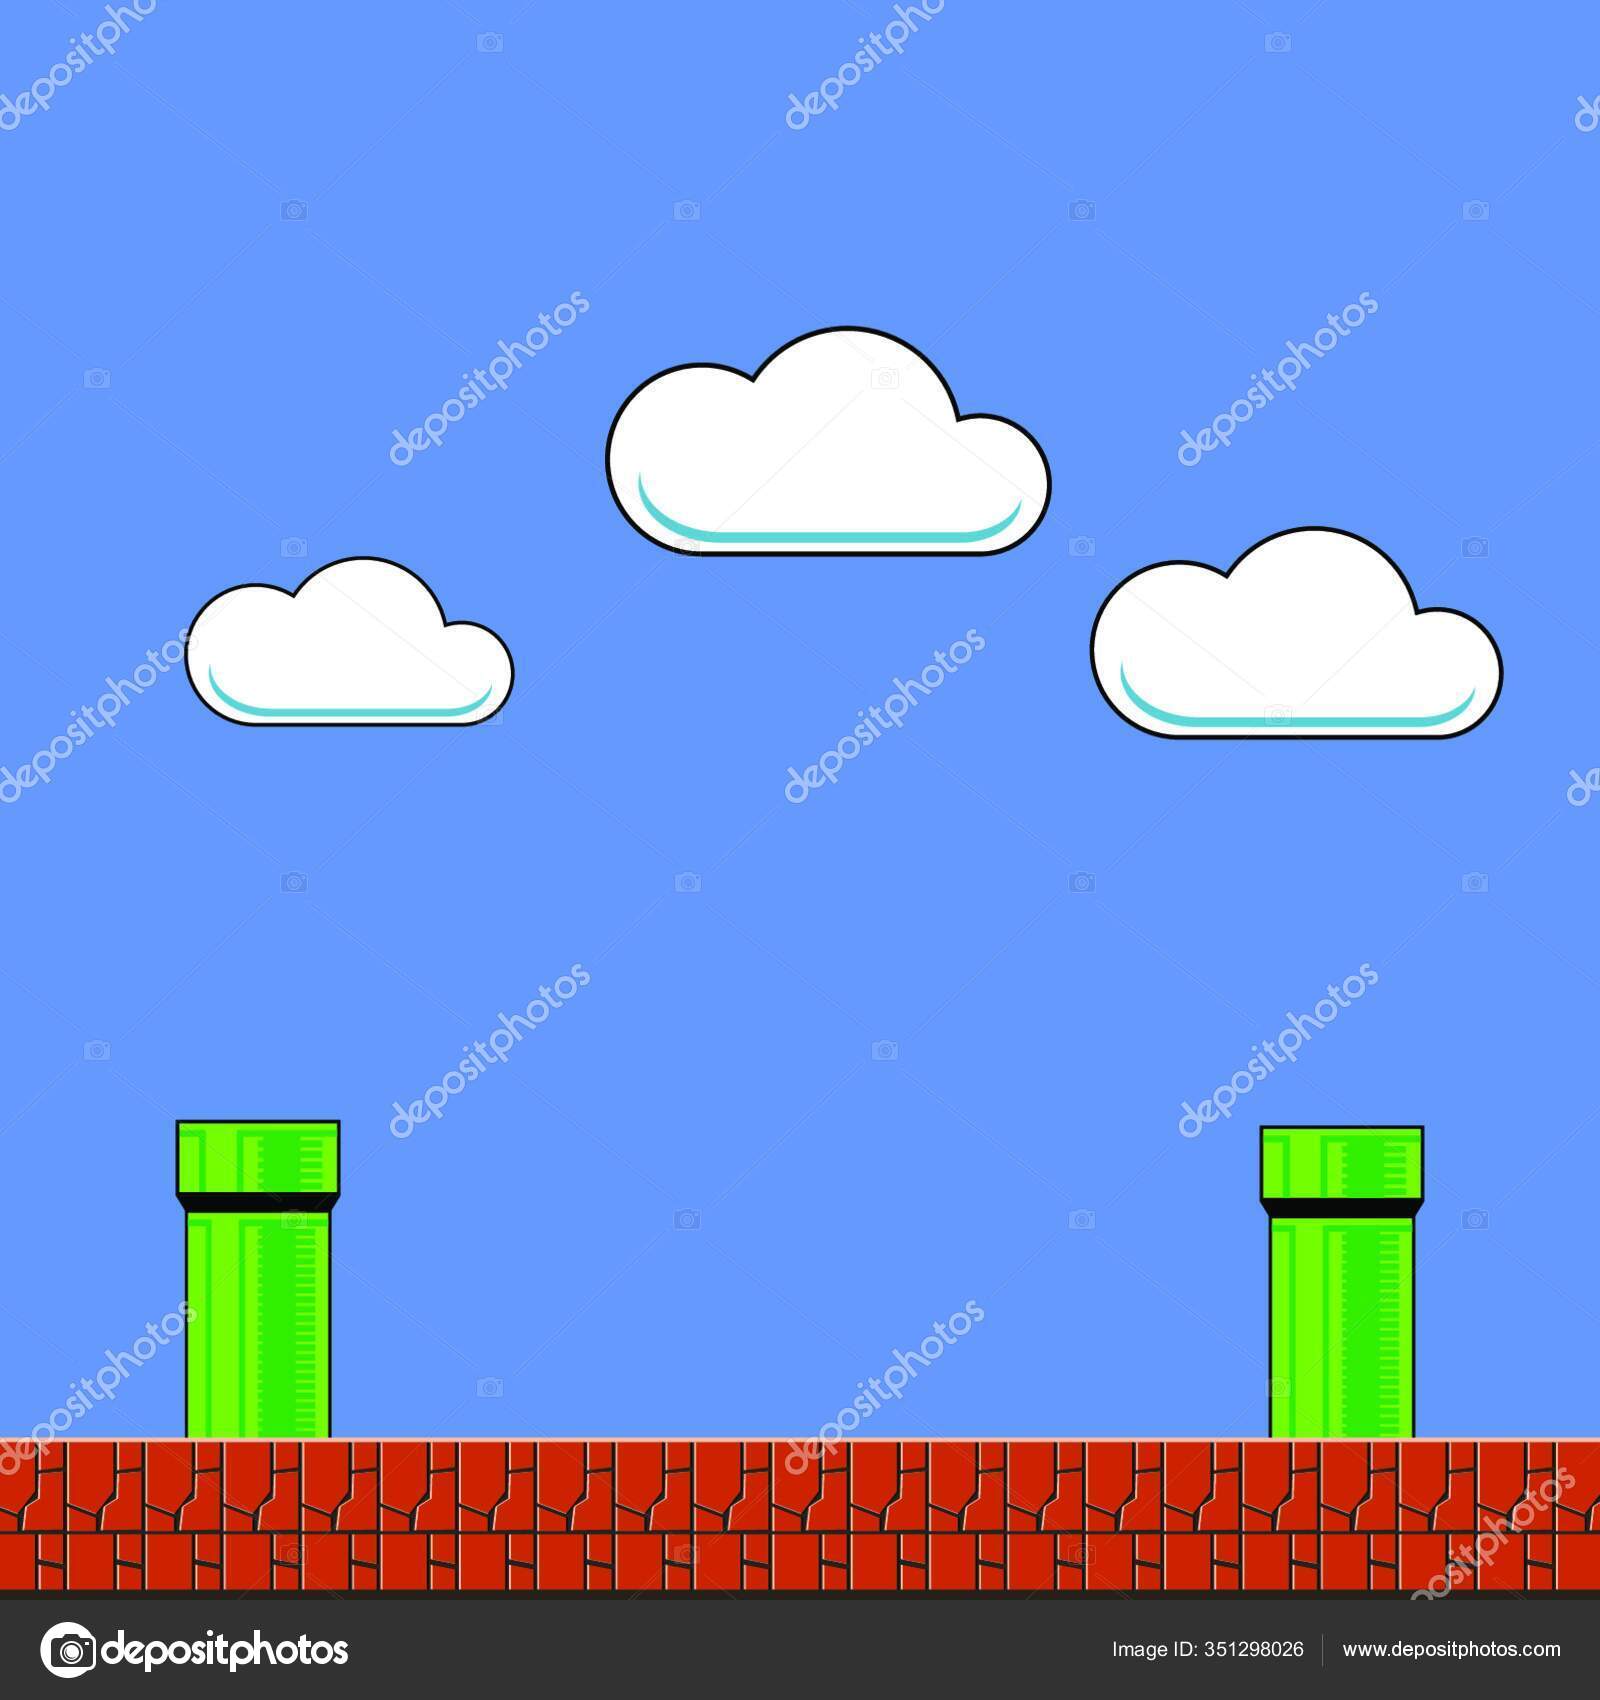 Featured image of post Retro Mario Wallpaper Download share or upload your own one